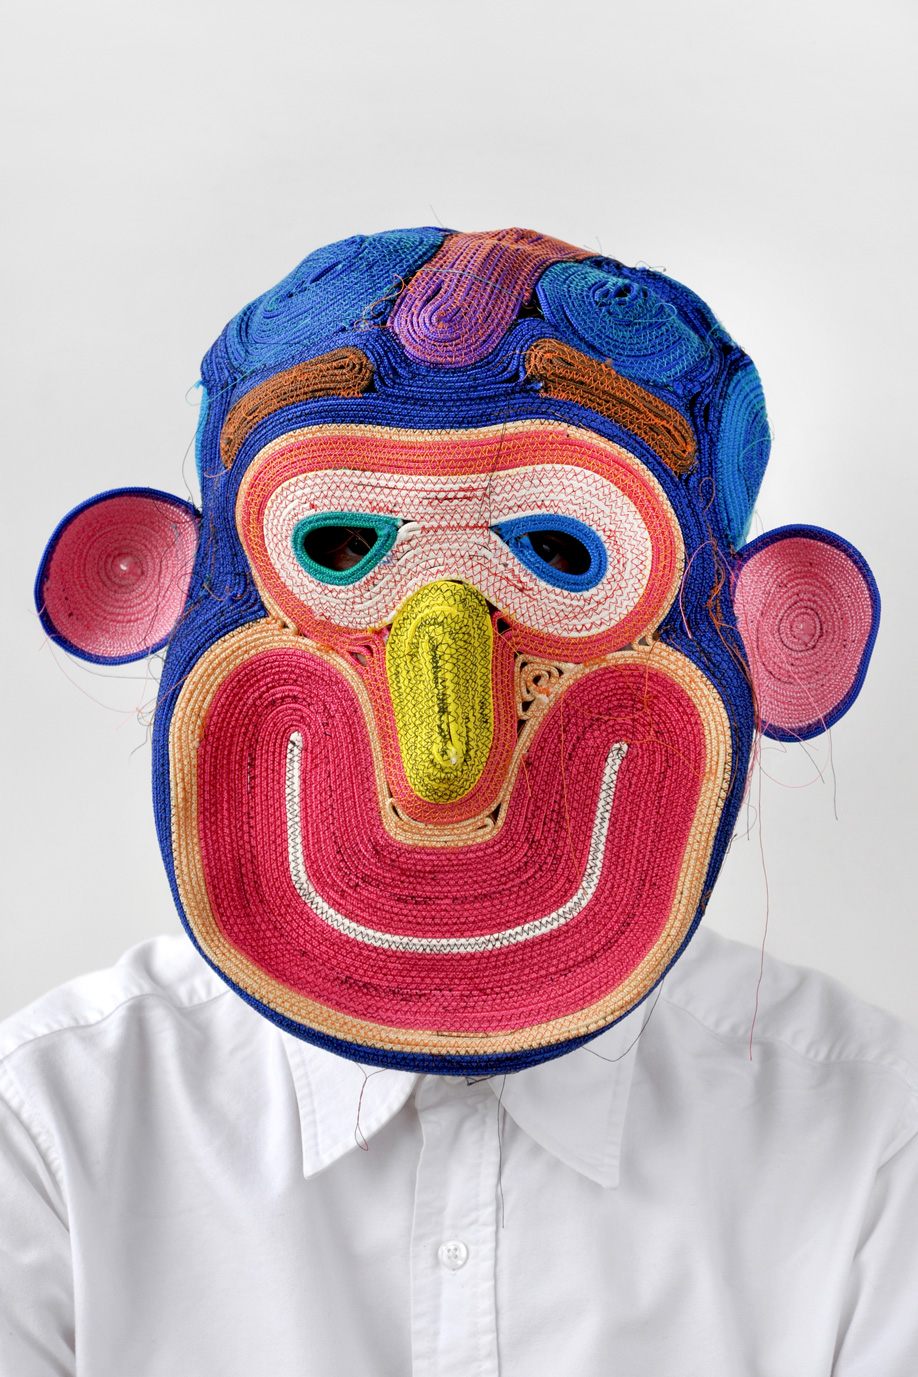 Designer Bertjan Pot with a colourful rope-woven mask